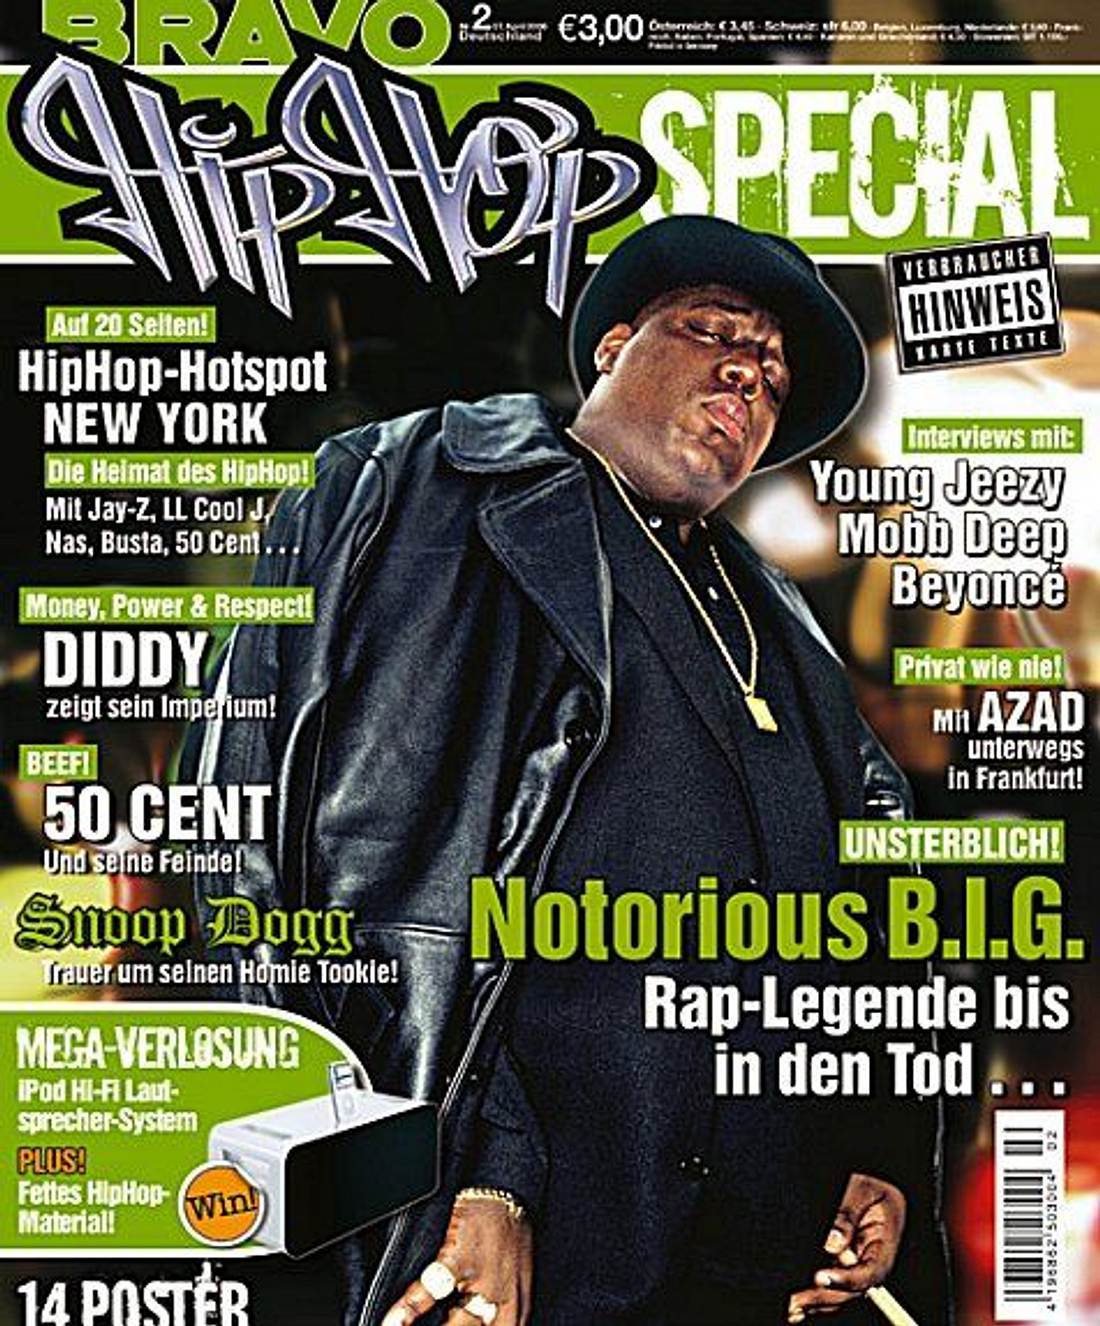 BRAVO HIPHOP-Special: Notorious B.I.G.!